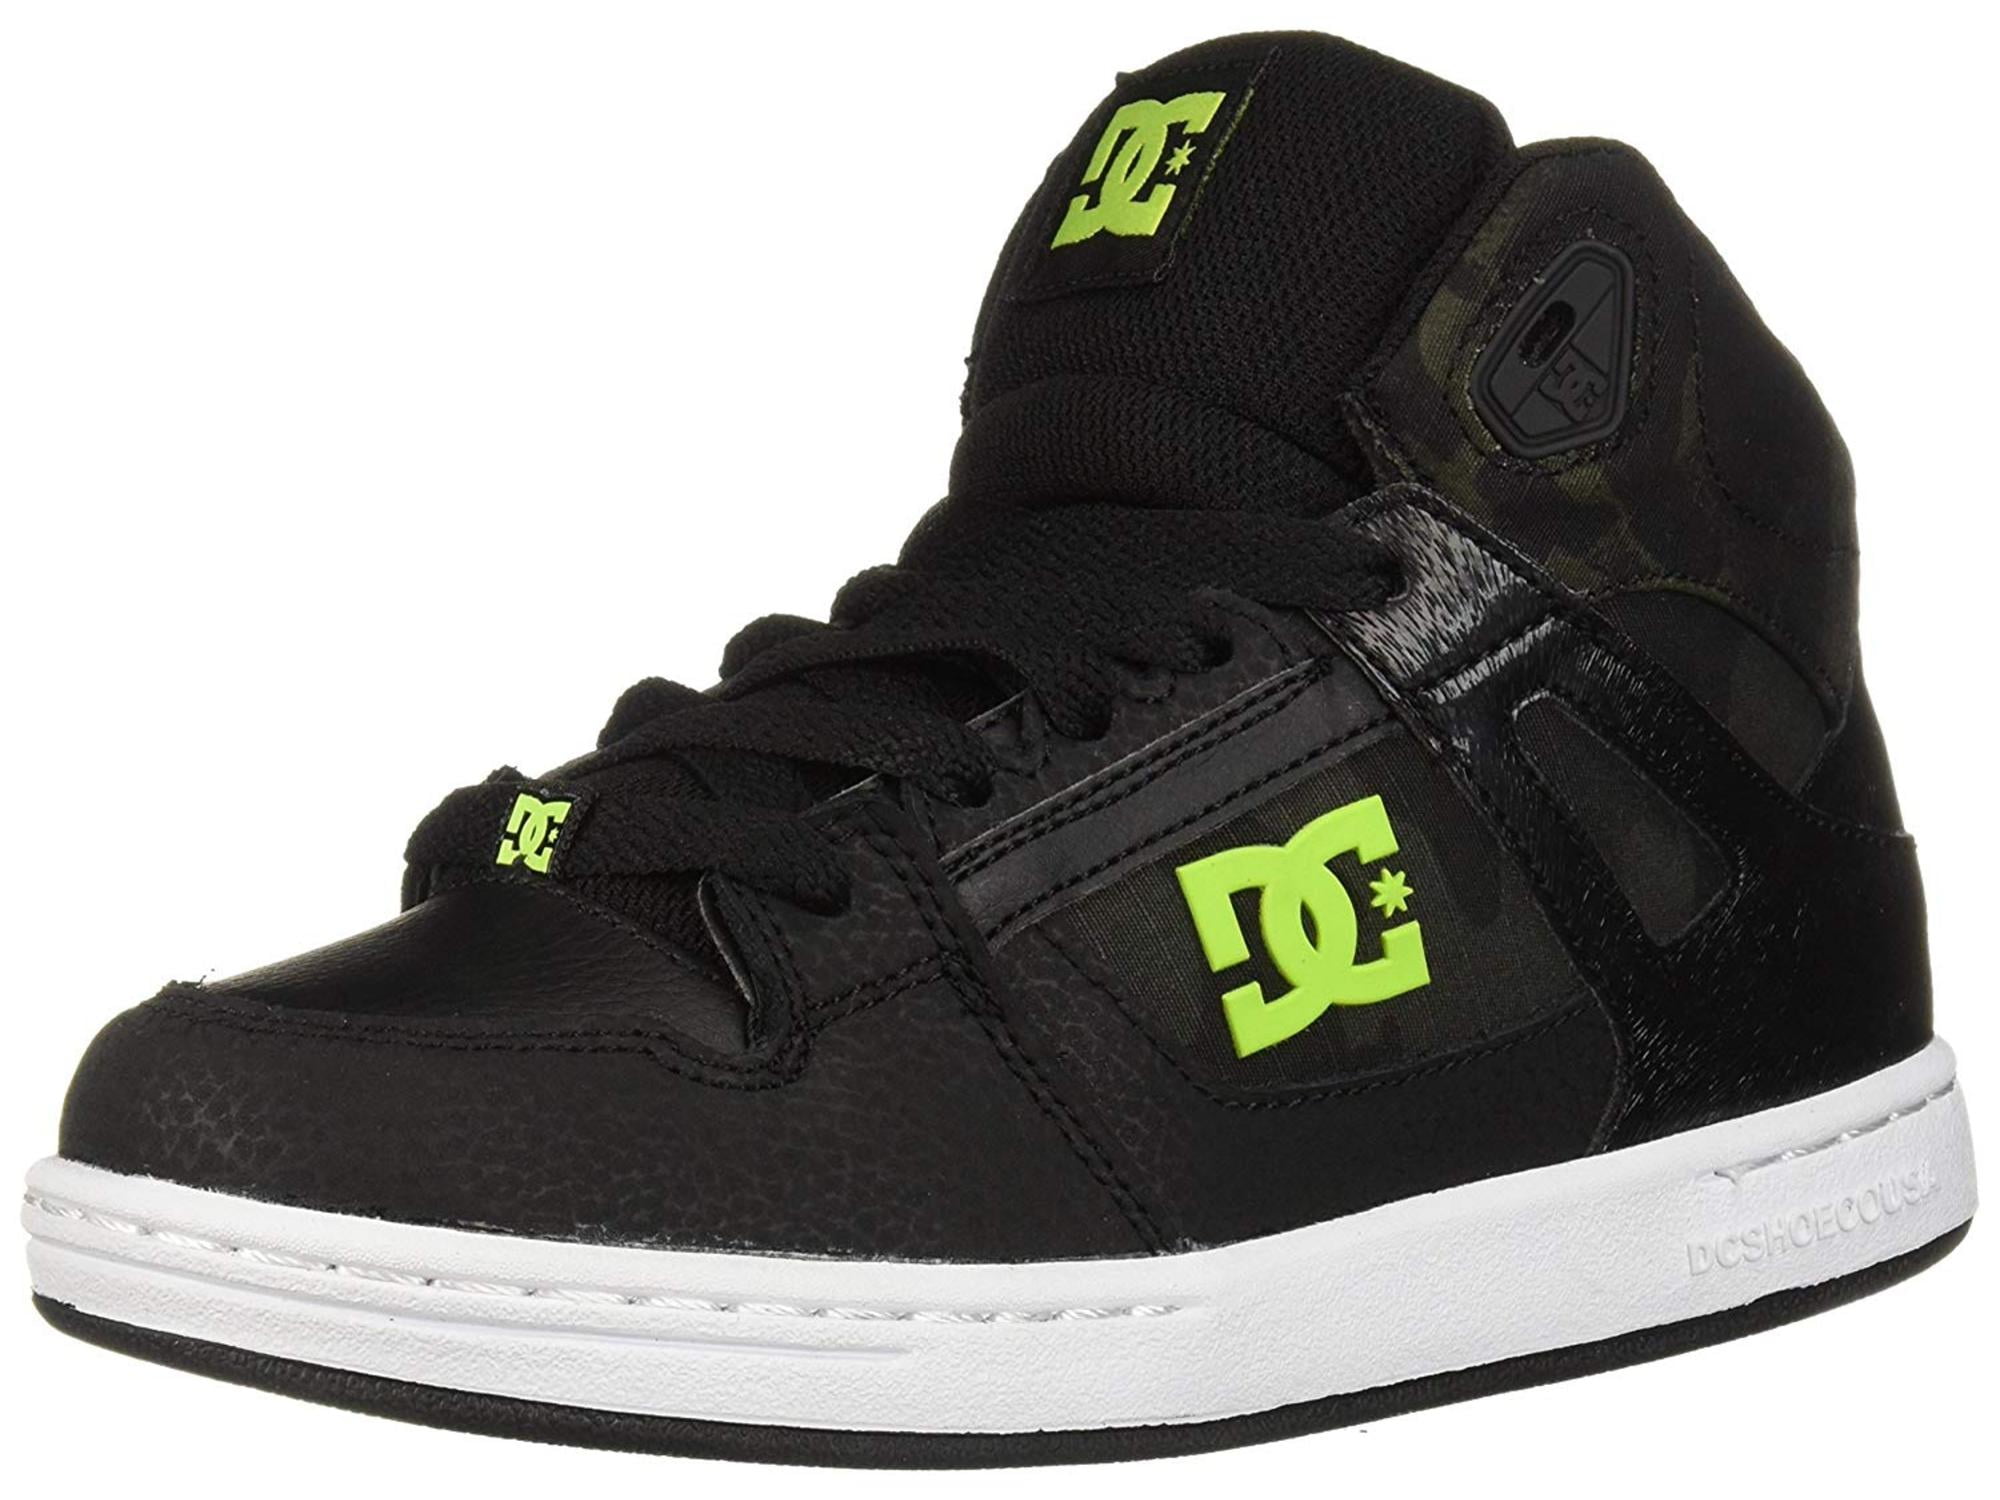 DC shoes youth Cole pro Black/Green enfants sneaker skater Chaussure Boys NEUF 